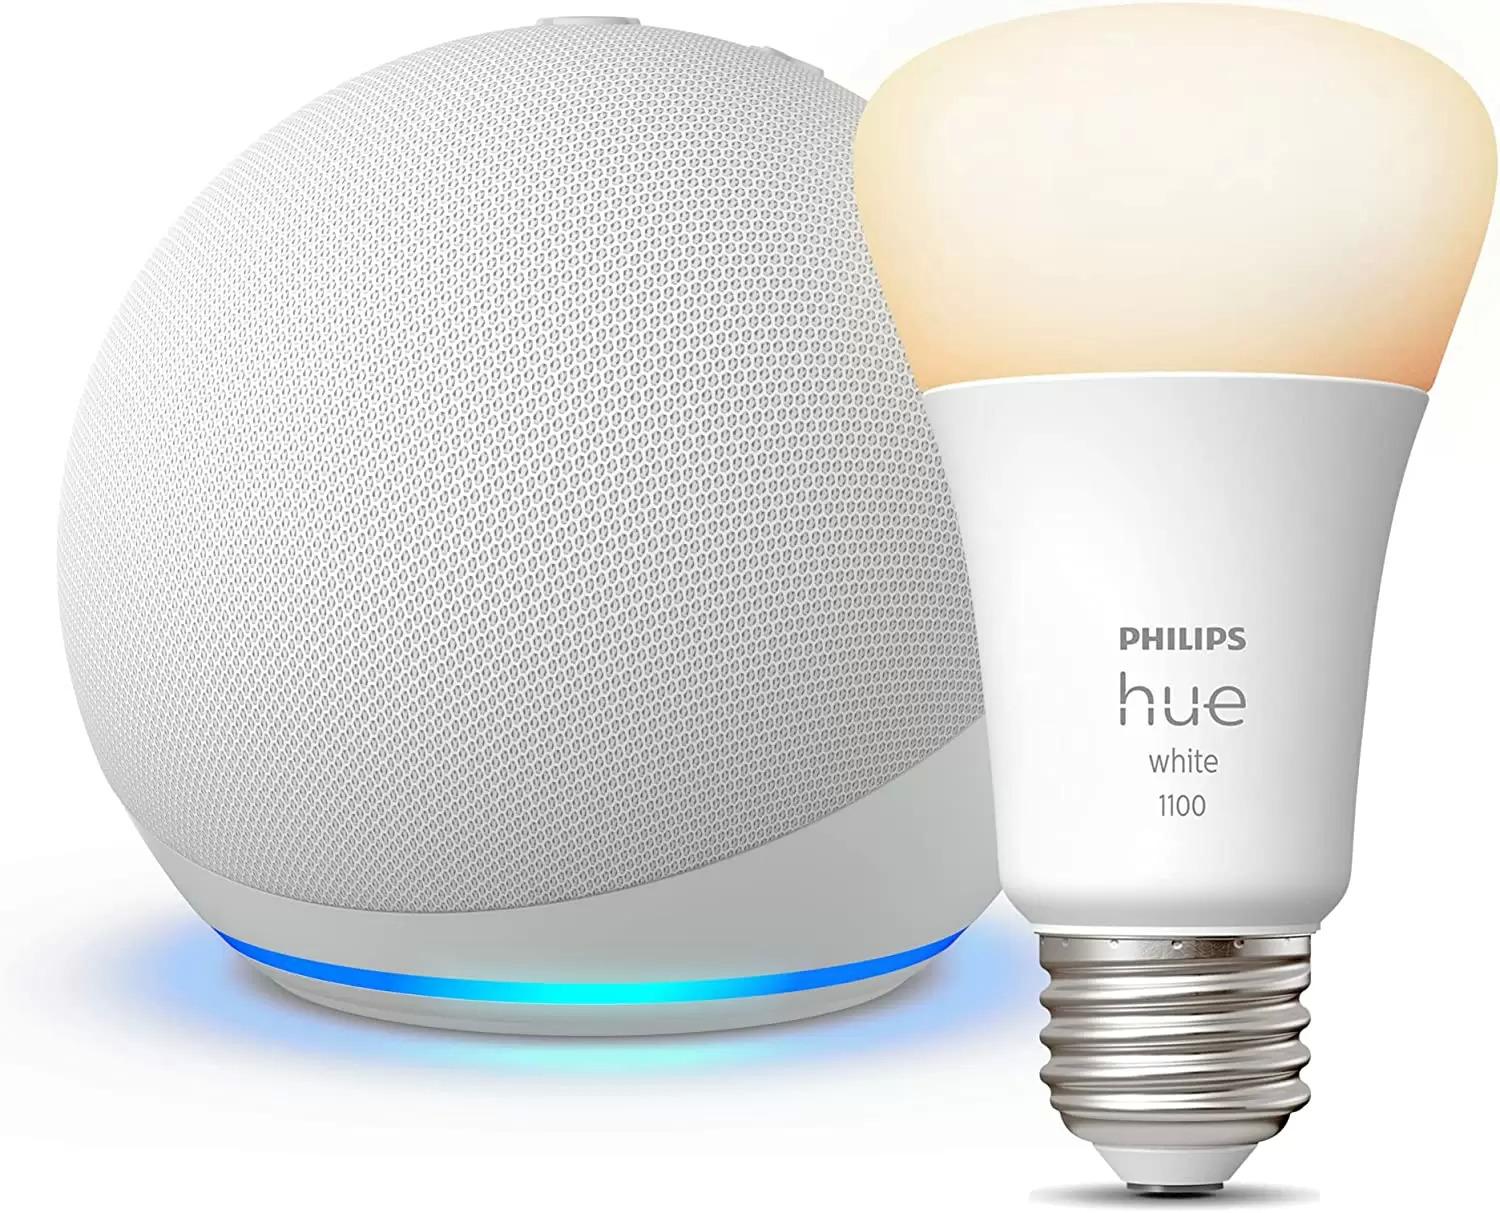 Echo Dot Smart Speaker 5th Gen with Philips Hue A19 Bulb for $24.99